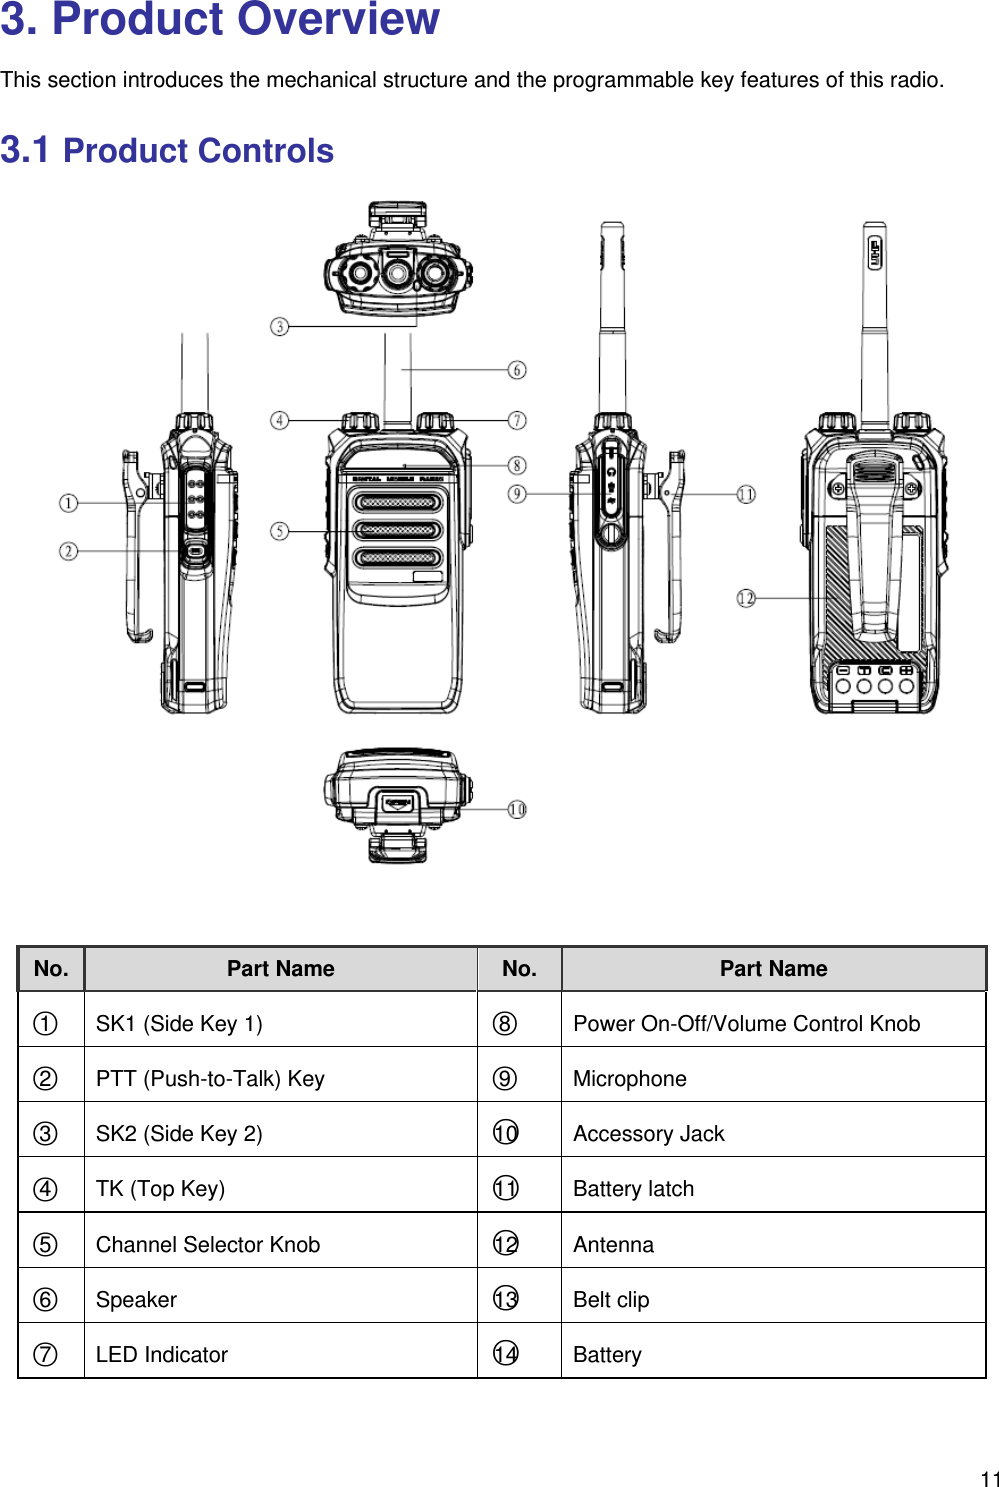   113. Product Overview This section introduces the mechanical structure and the programmable key features of this radio.   3.1 Product Controls   No.  Part Name  No.  Part Name ○1   SK1 (Side Key 1)  ○8   Power On-Off/Volume Control Knob ○2     PTT (Push-to-Talk) Key    ○9  Microphone  ○3   SK2 (Side Key 2)    ○10  Accessory Jack ○4   TK (Top Key)    ○11  Battery latch ○5   Channel Selector Knob    ○12  Antenna ○6  Speaker  ○13  Belt clip  ○7  LED Indicator  ○14  Battery   